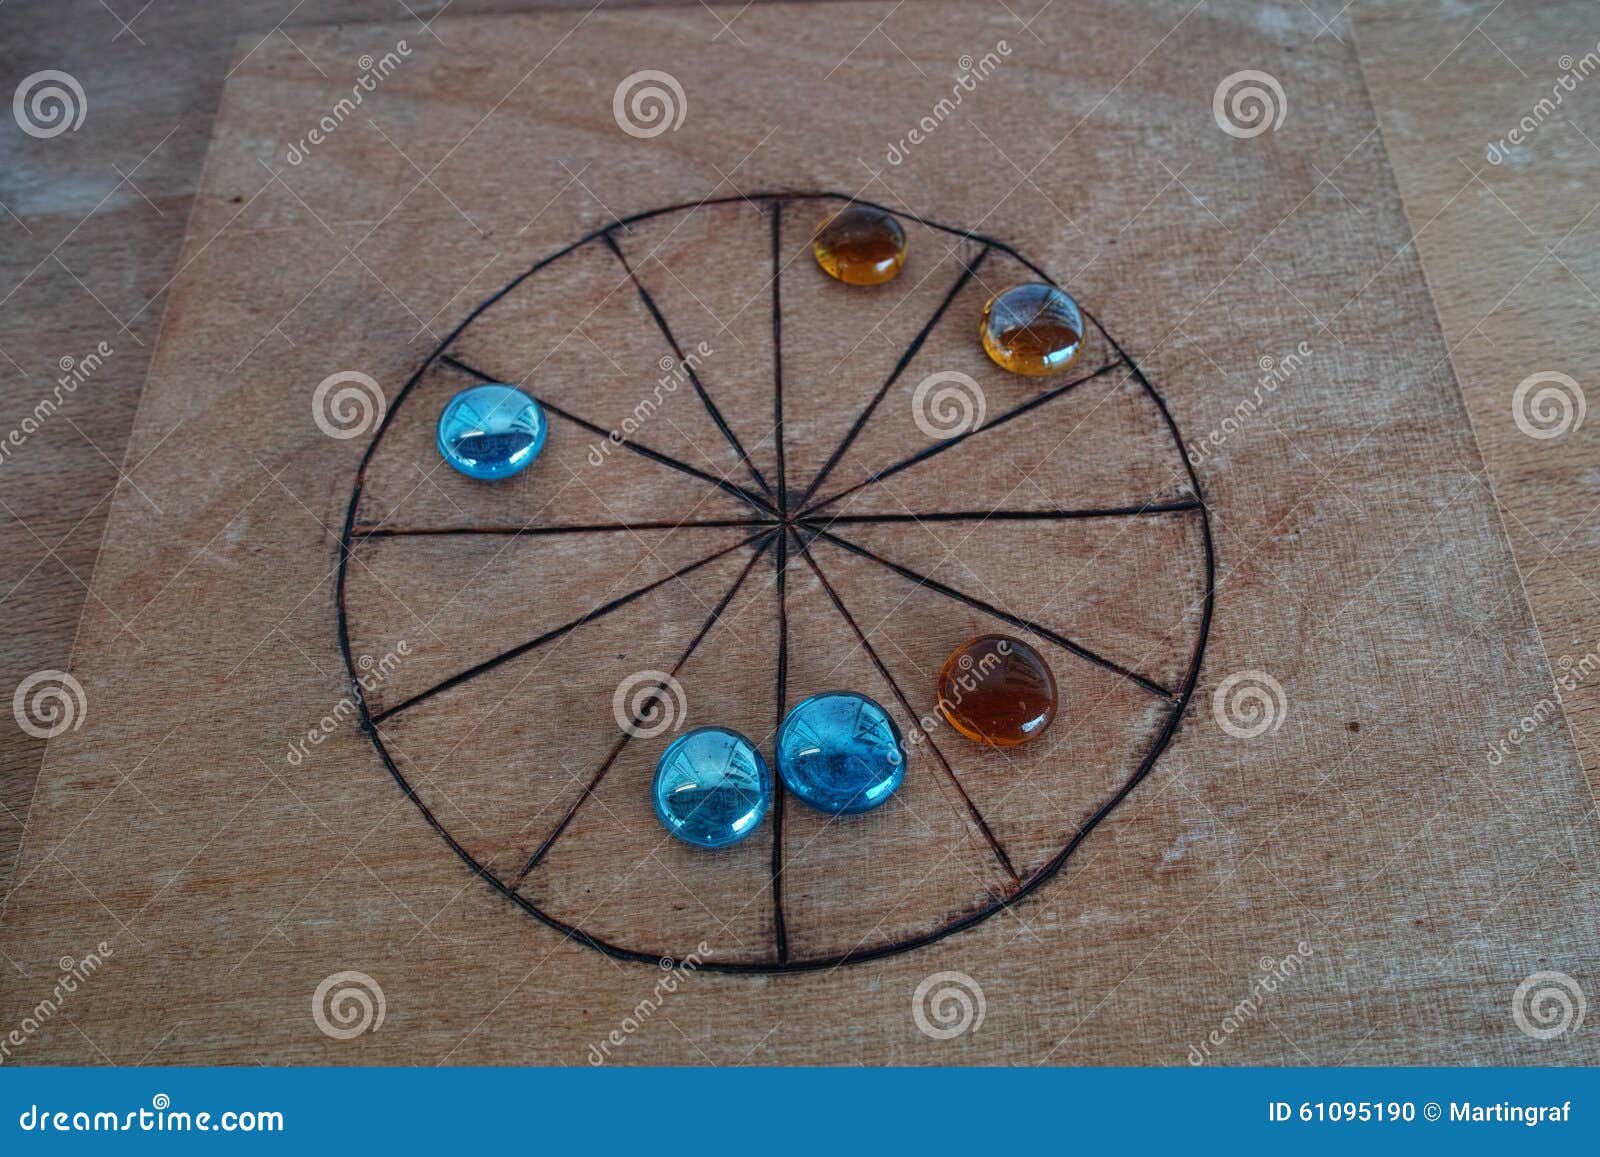 roman-board-game-tic-tac-toe-royalty-free-stock-photography